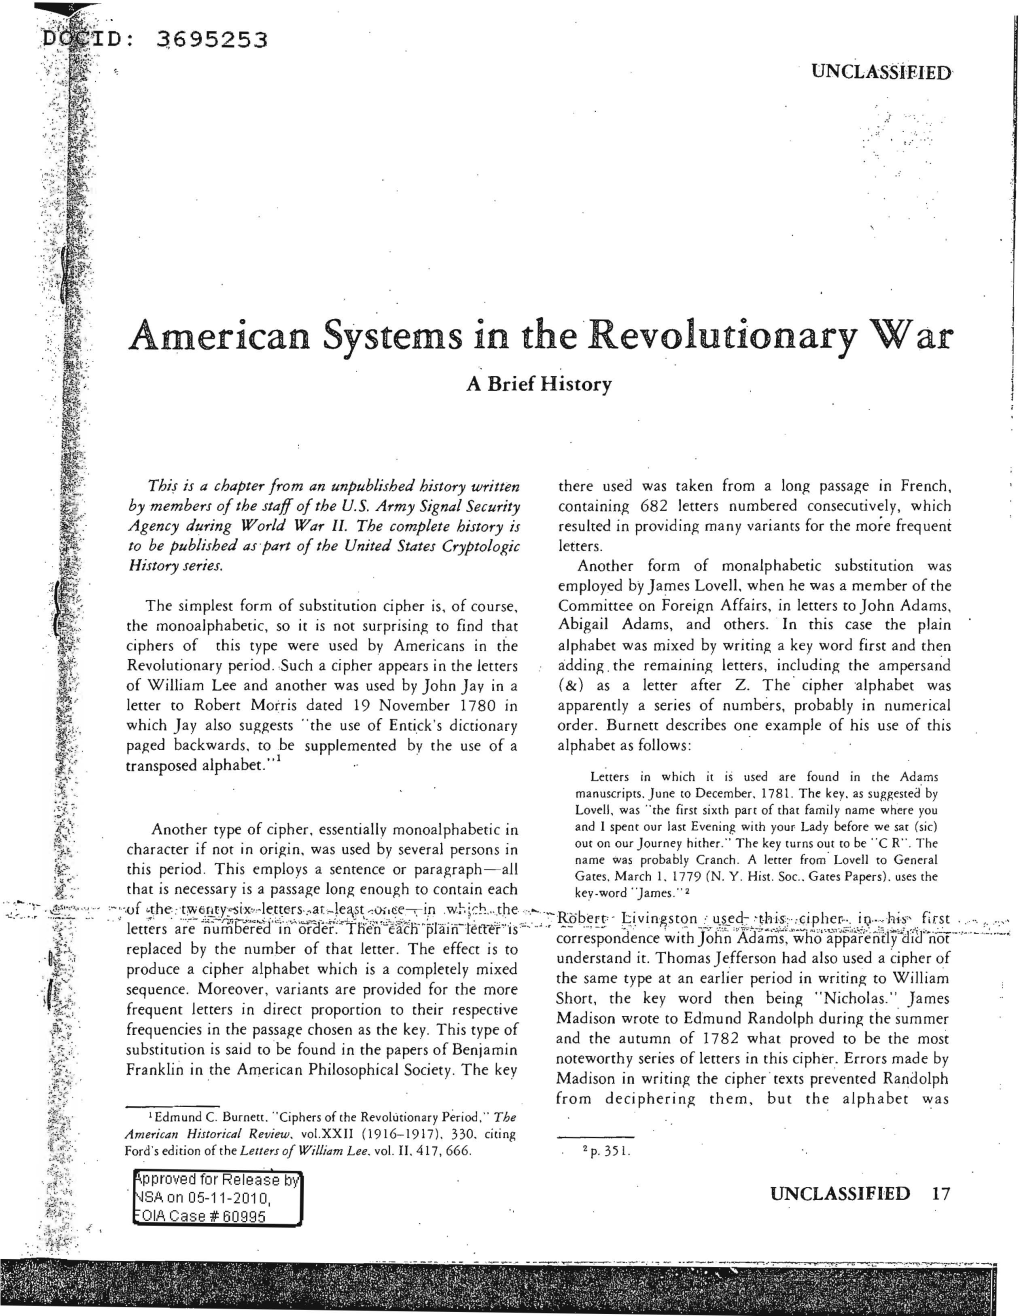 American Systems in the Revolutionary War a Brief History